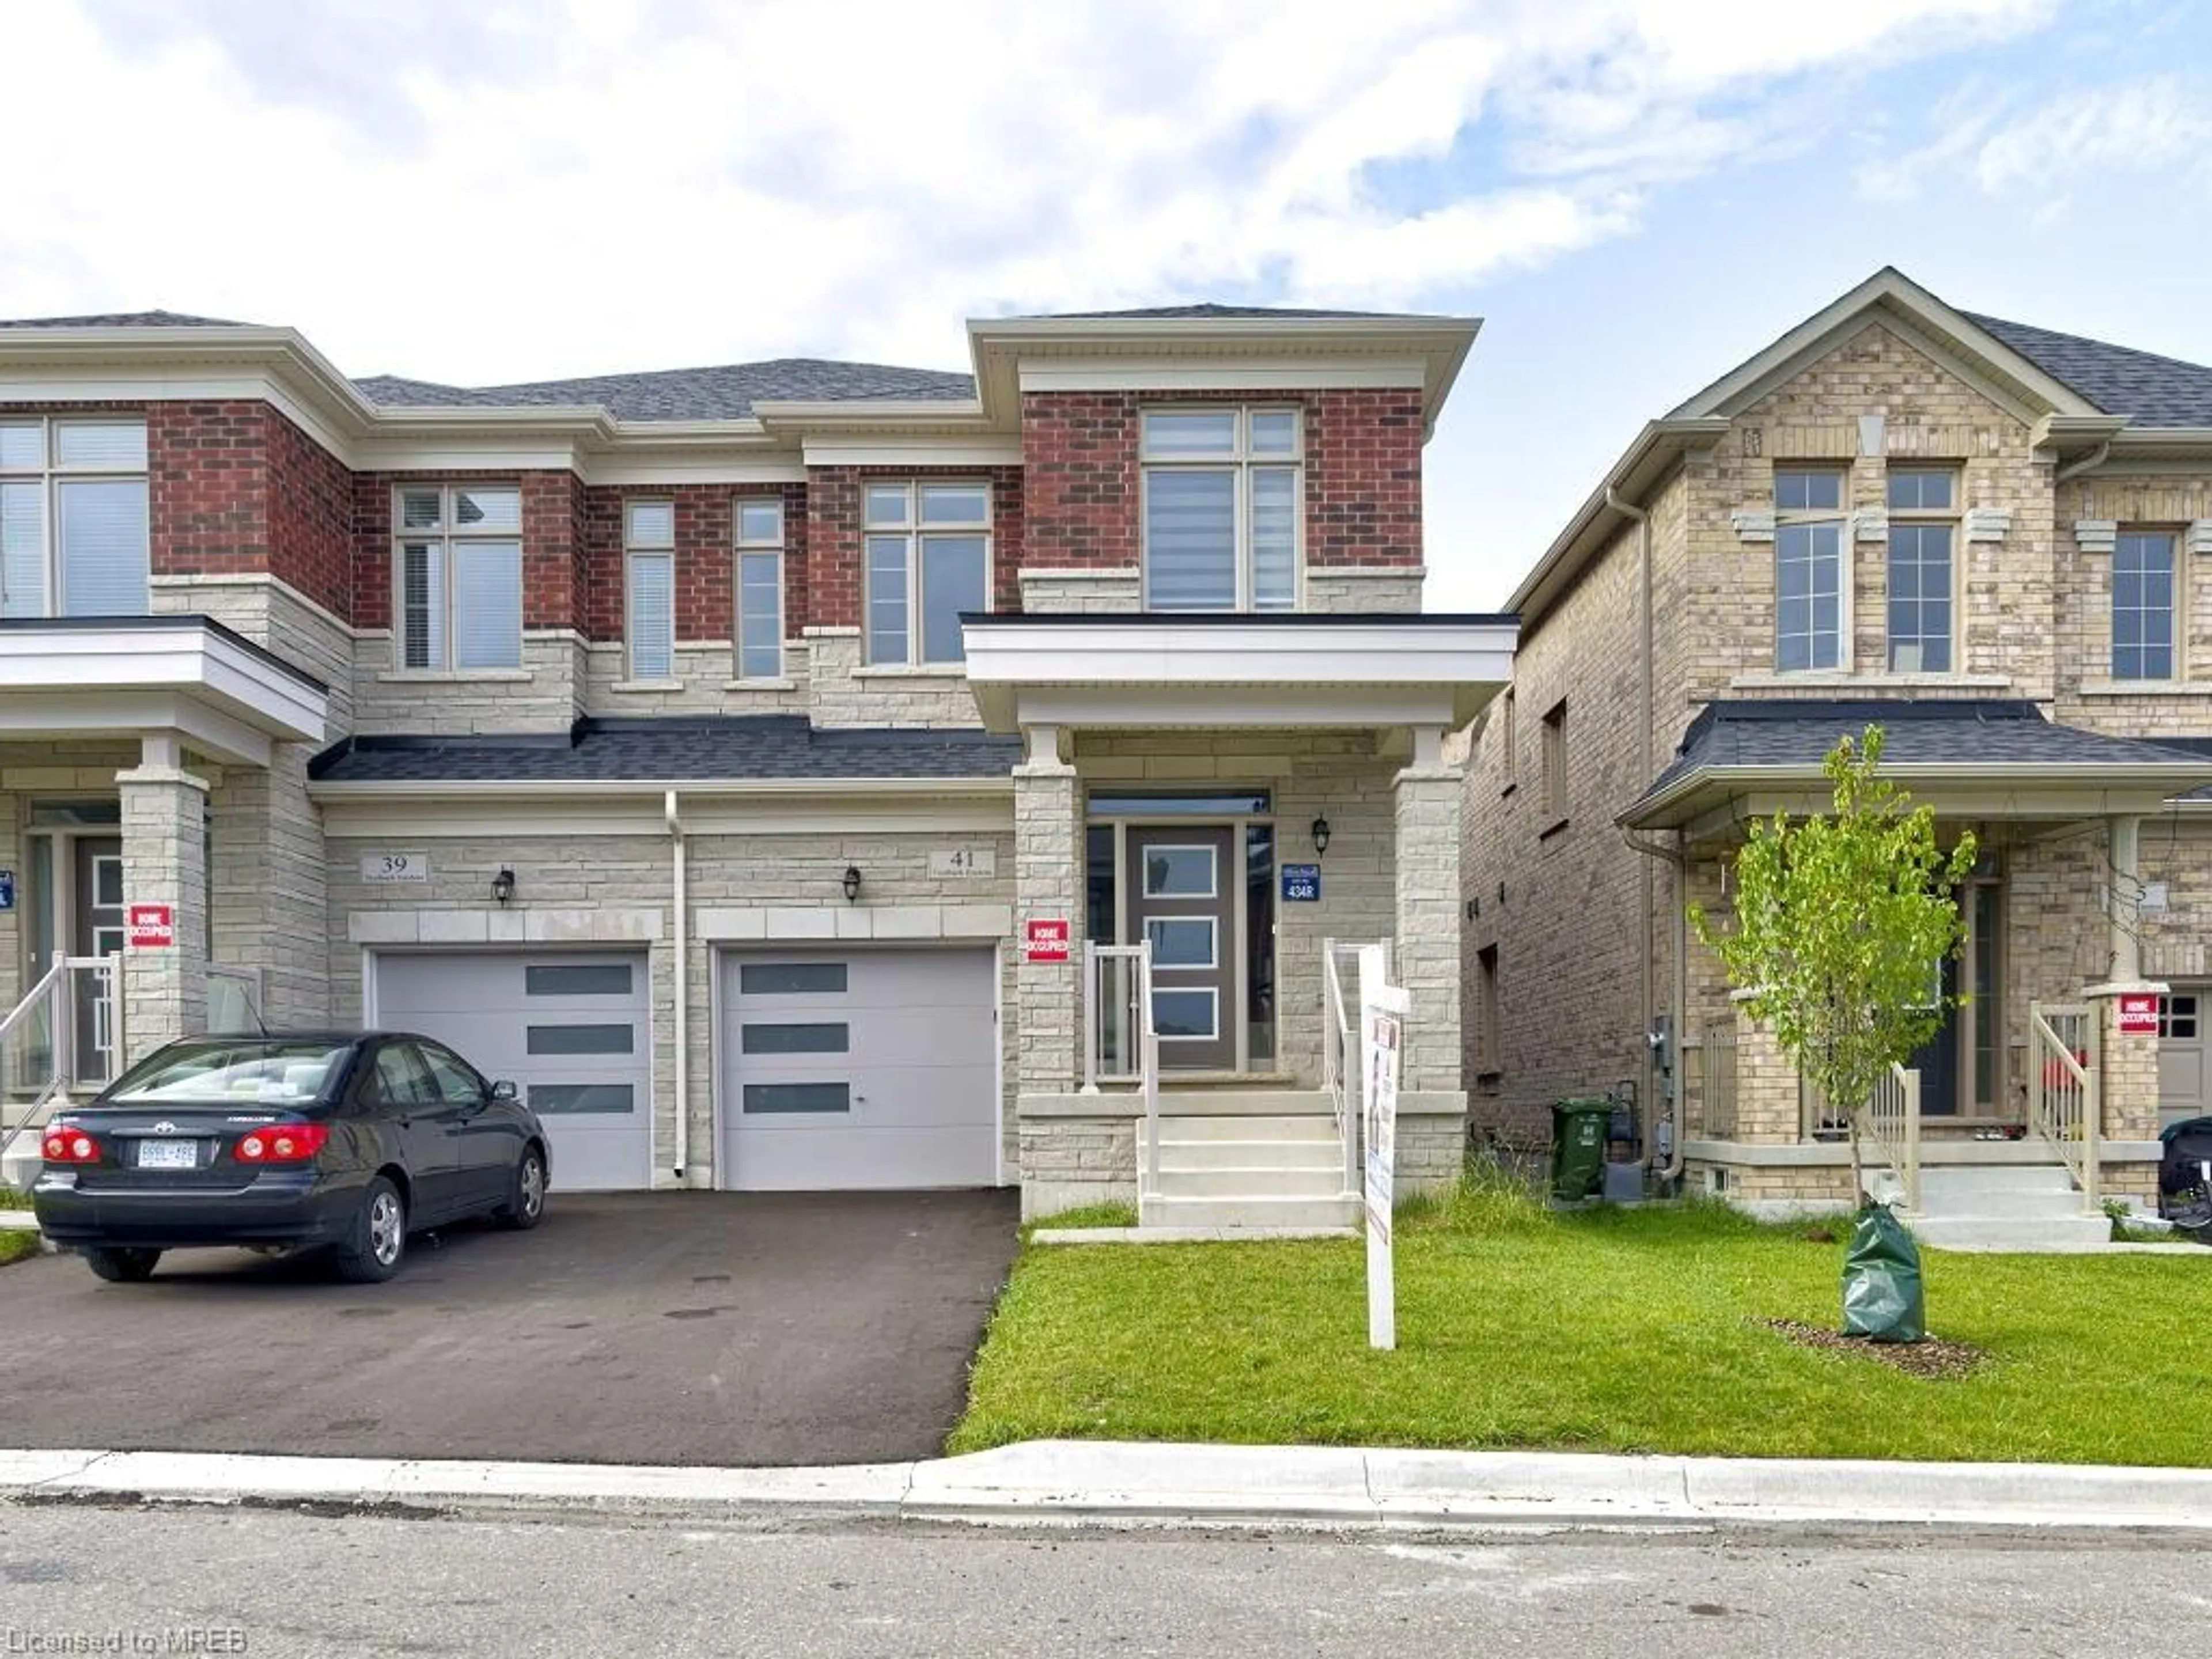 A pic from exterior of the house or condo for 41 Trailbank Gdns, Waterdown Ontario L8B 1Y5